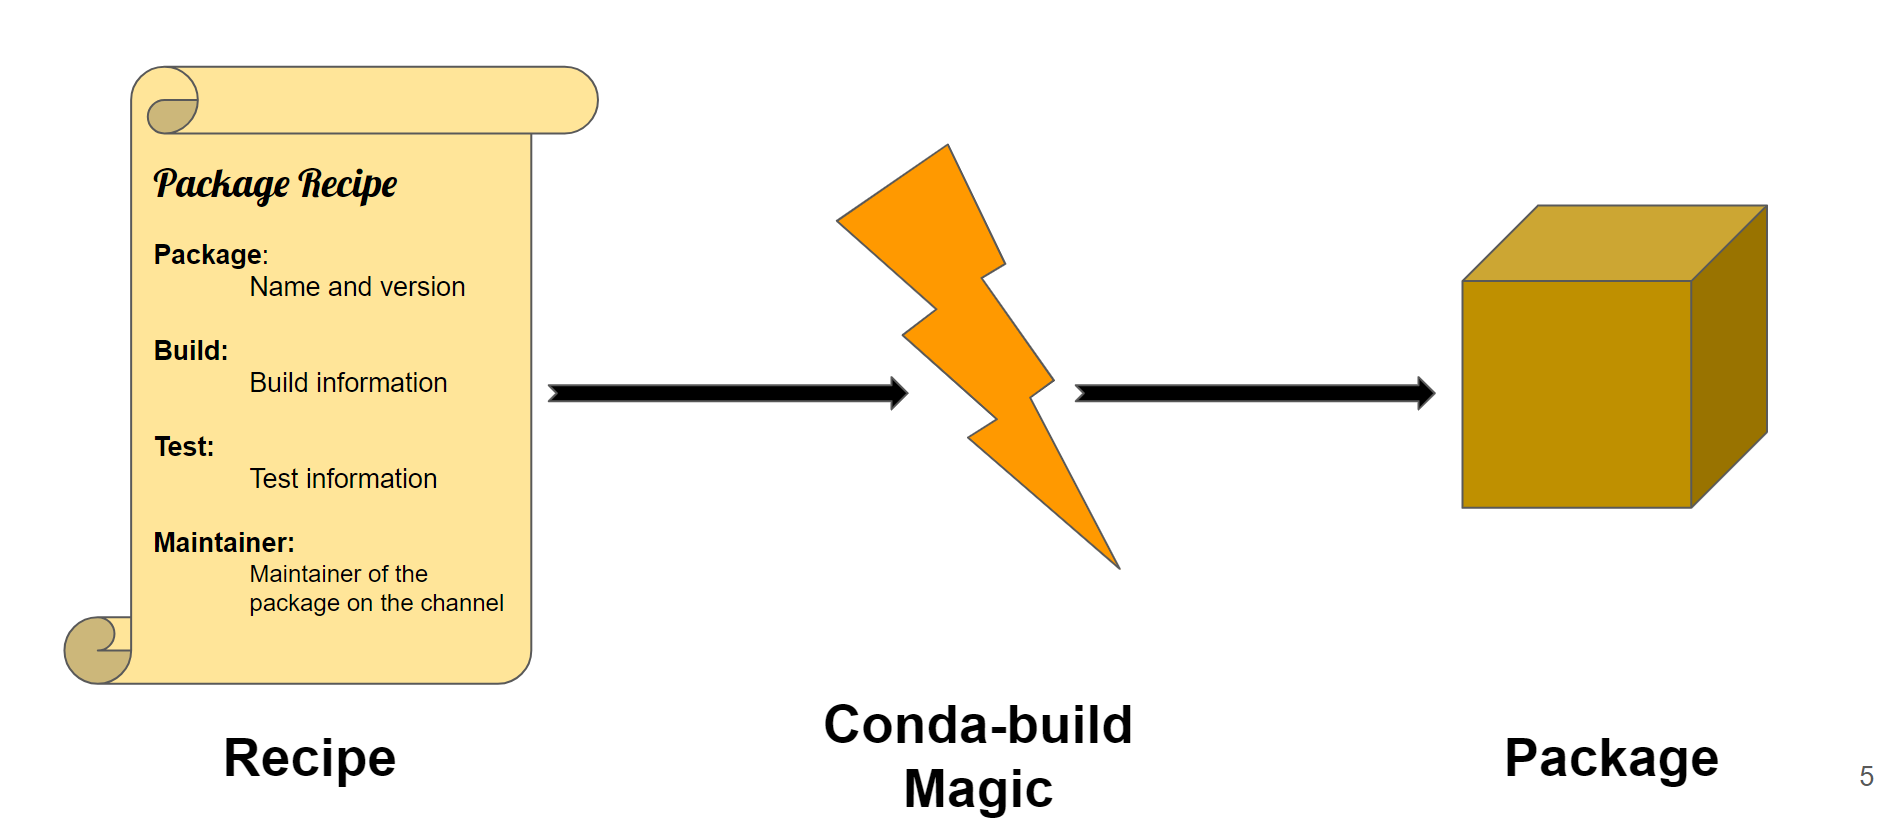 A flow diagram of a curled up piece of paper (representing a recipe) passing through a thunder bolt (representing conda-build machinery) and being converted into a brown box (representing a package).